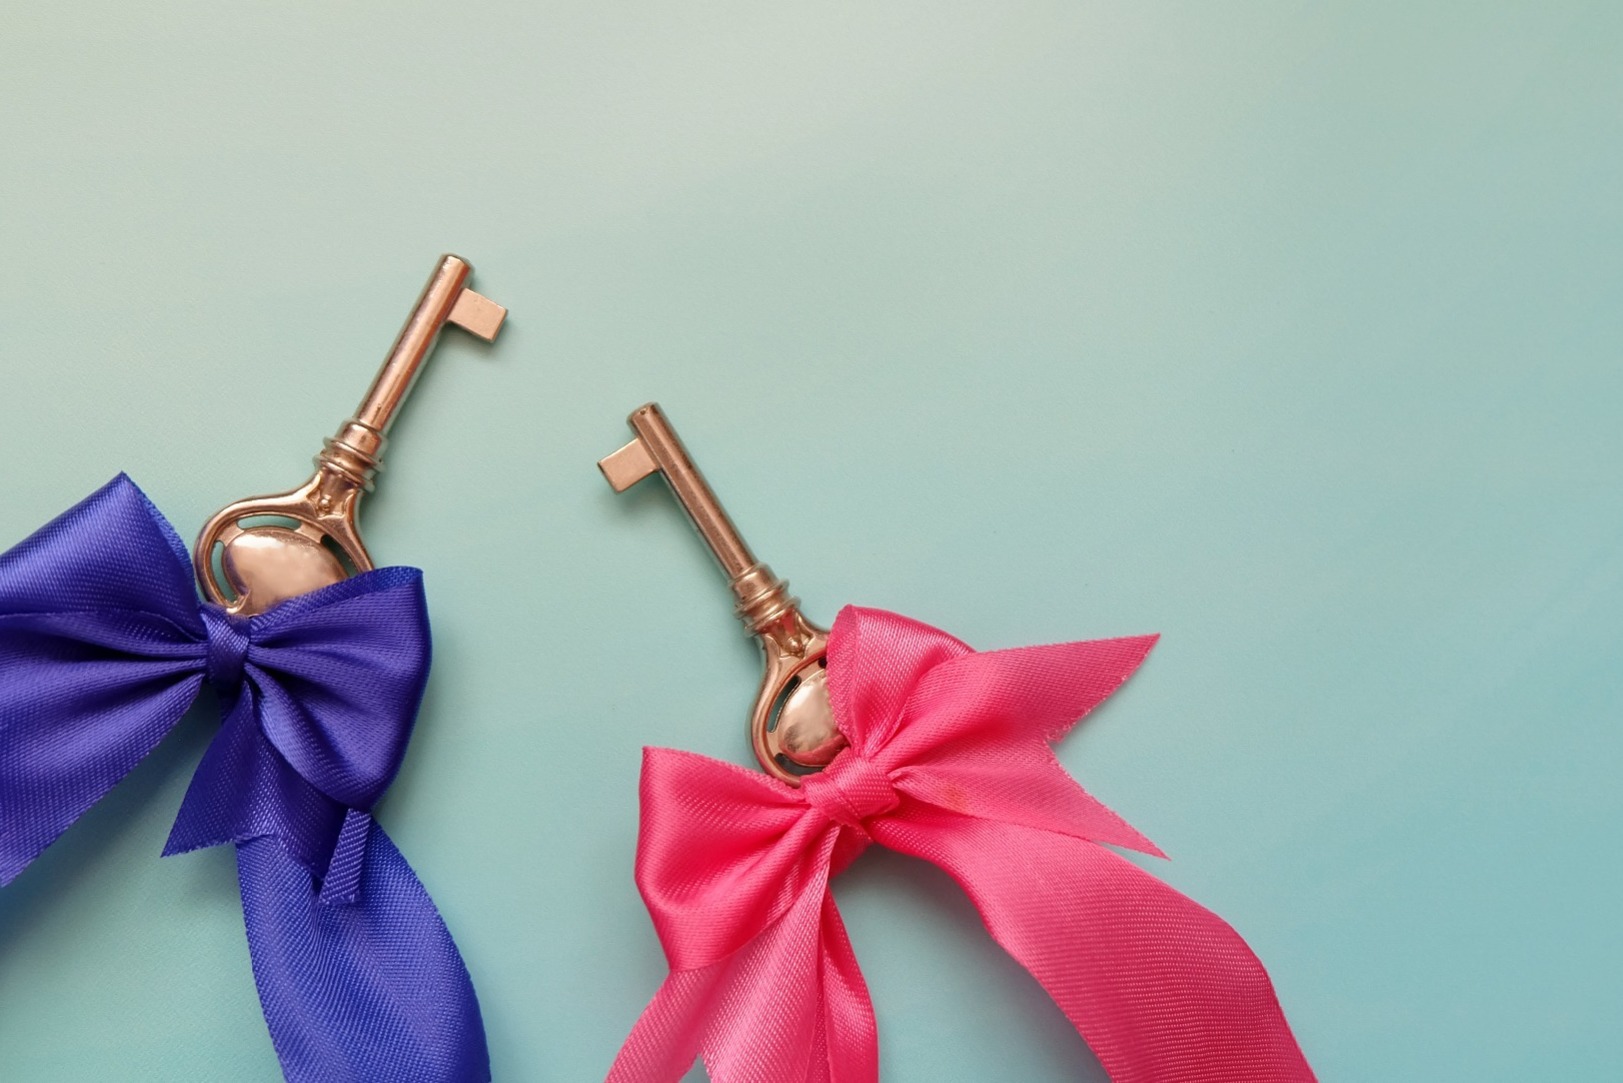 Two keys, with ribbon tied to each one.